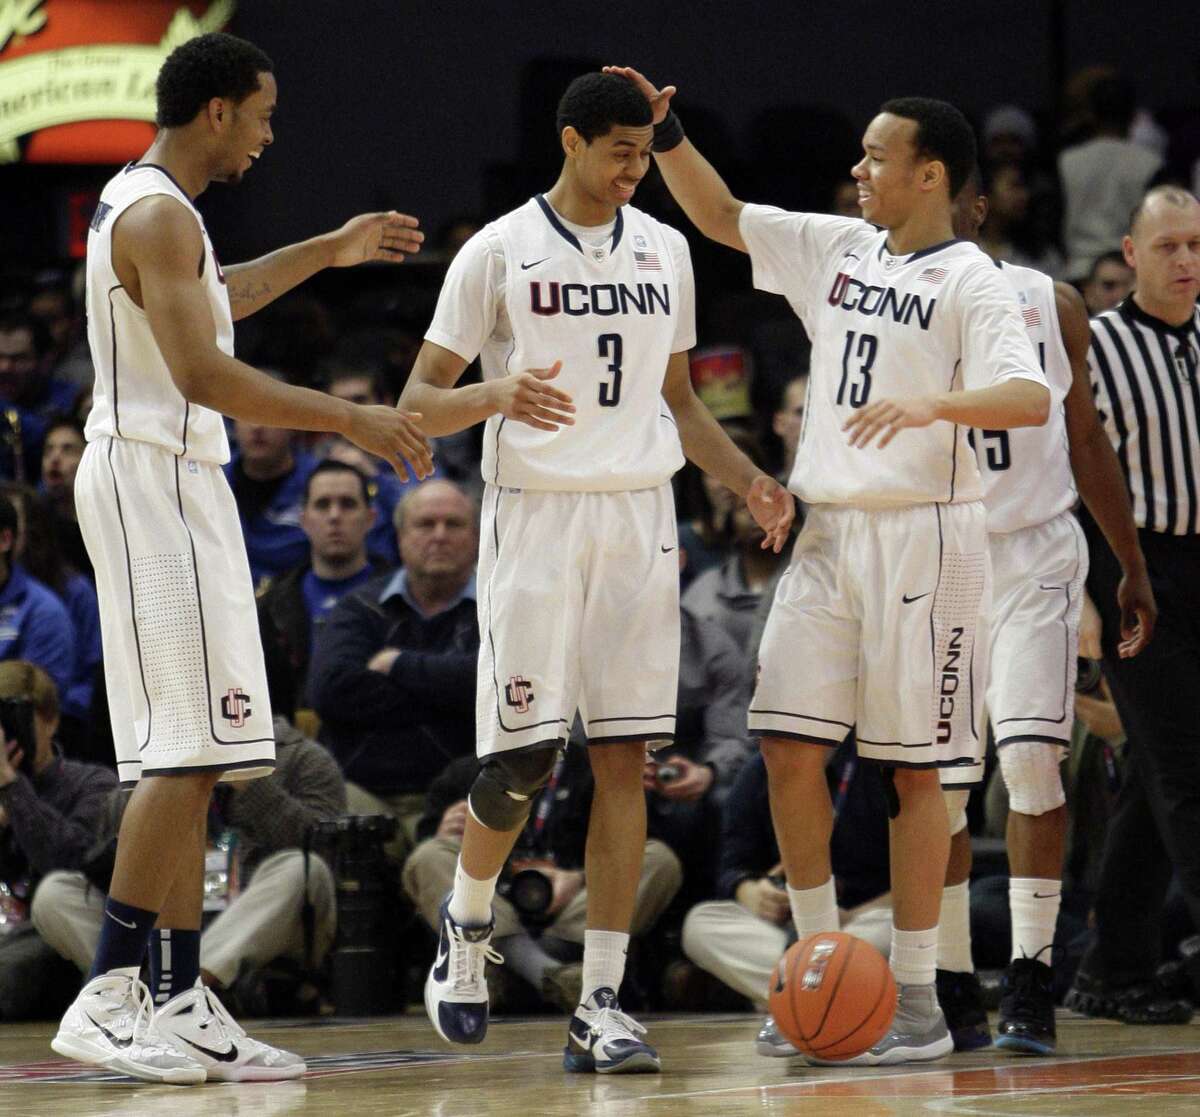 Connecticut's Jeremy Lamb (3) celebrates a basket with teammates Shabazz Napier (13) and Jamal Coombs-McDaniel during the first half of an NCAA college basketball game against DePaul at the Big East Championship, Tuesday, March 8, 2011 at Madison Square Garden in New York. (AP Photo/Mary Altaffer)